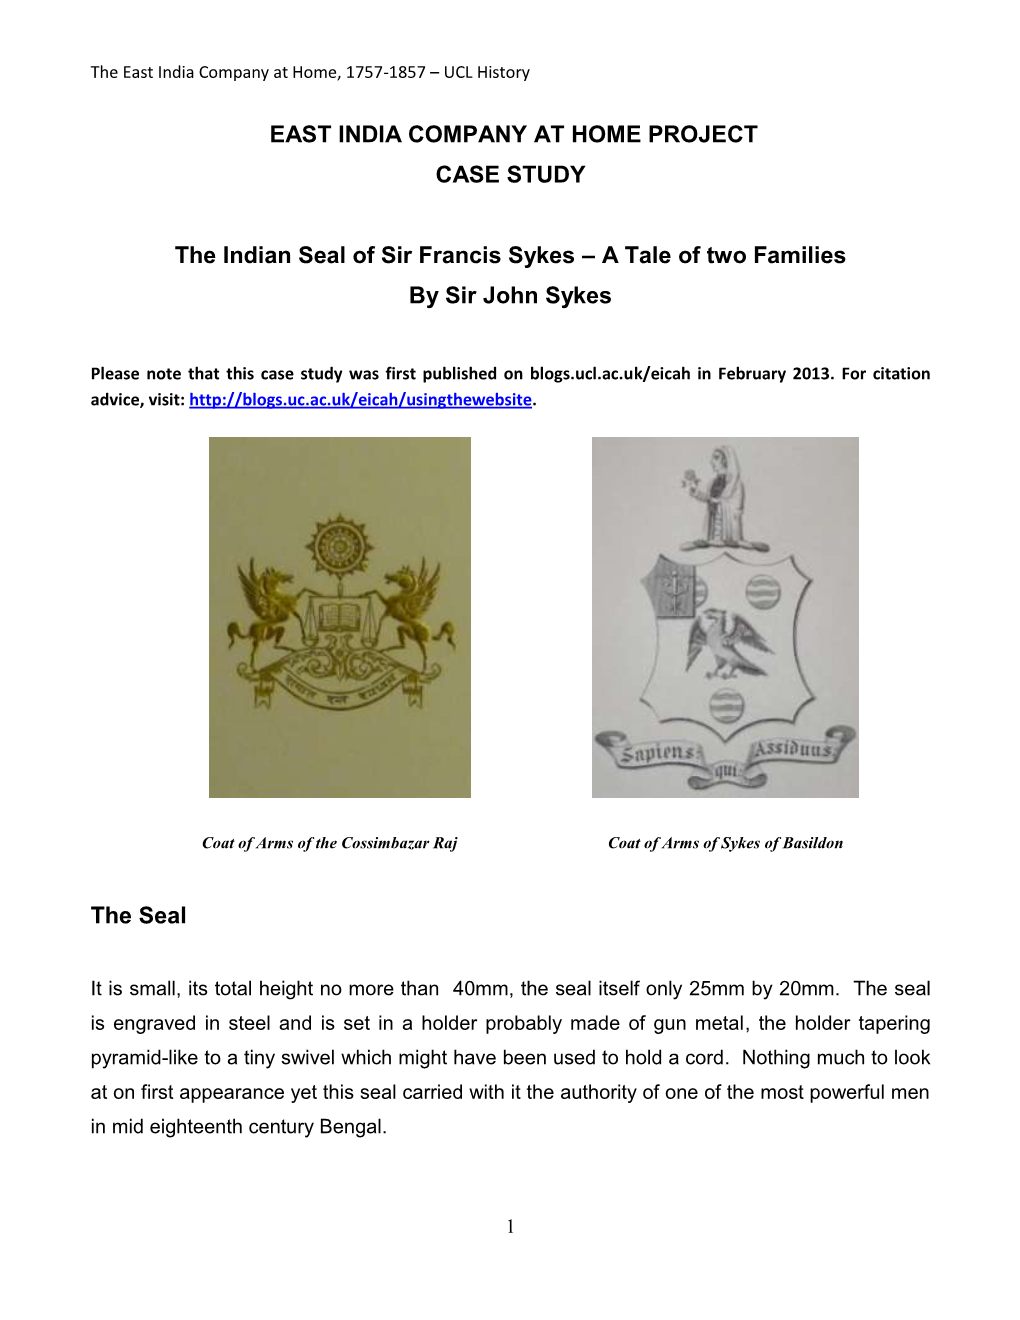 East India Company at Home Project Case Study